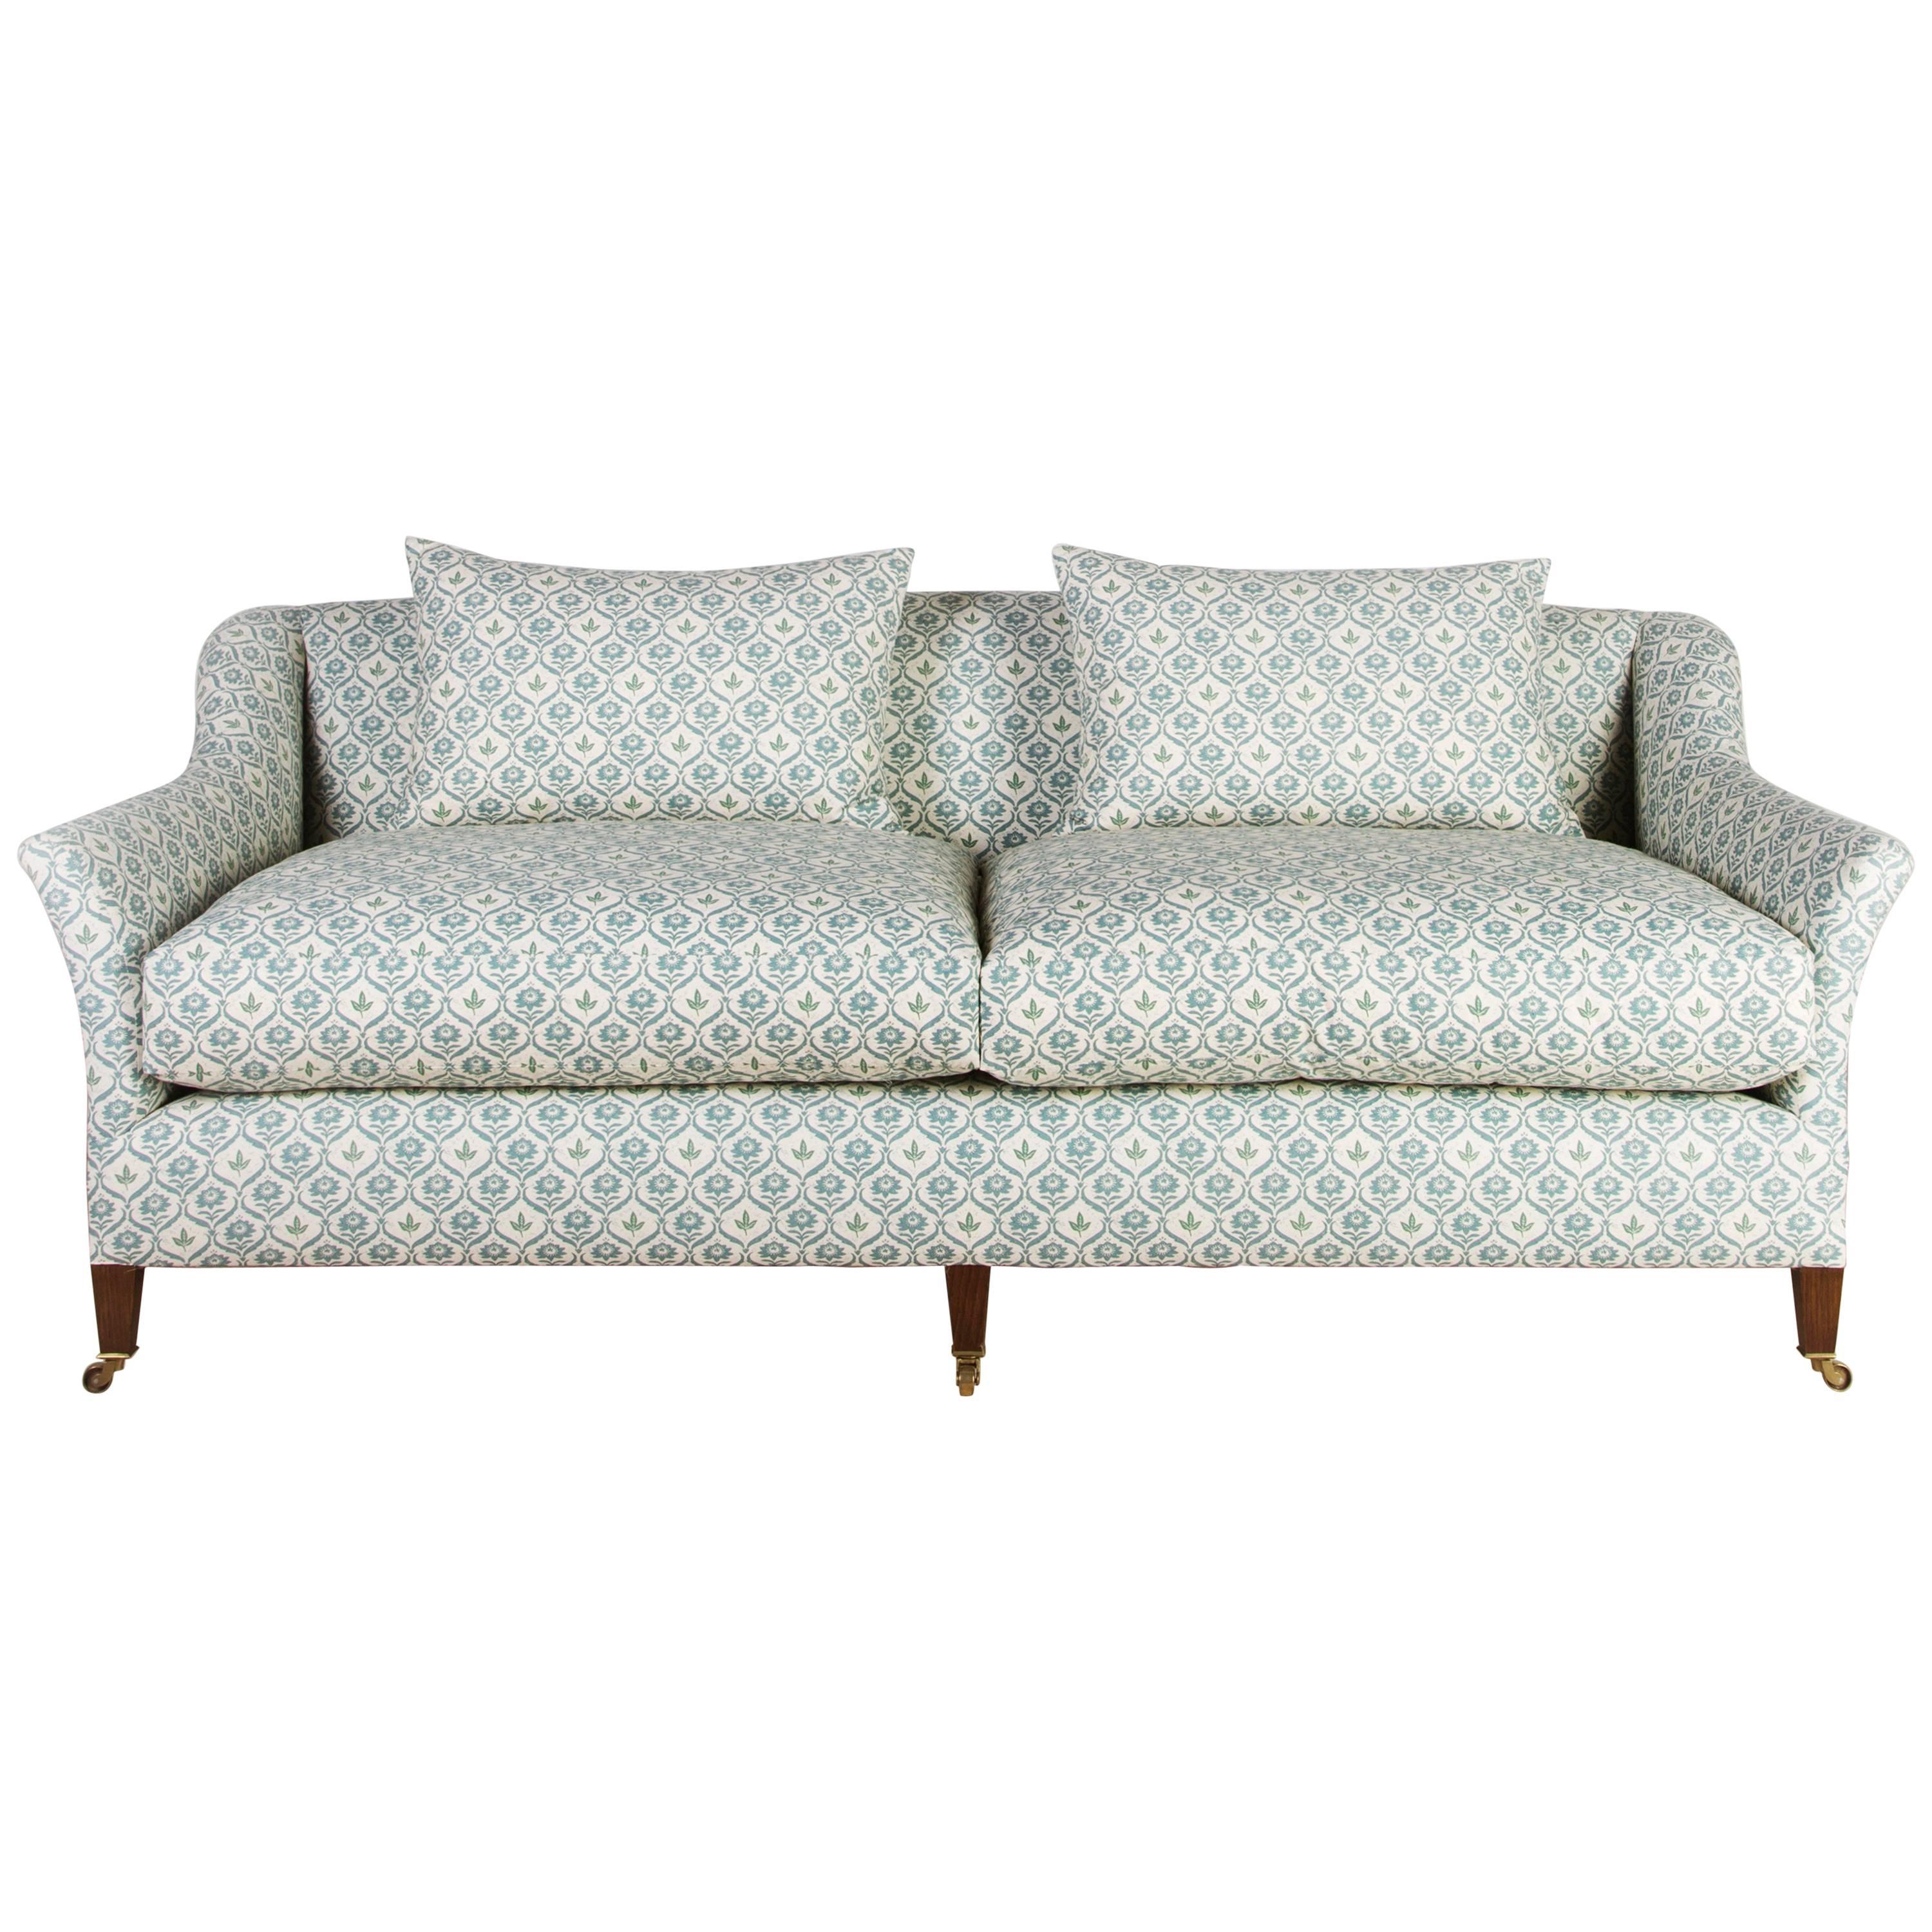 Traditional Elmstead Sofa For Sale